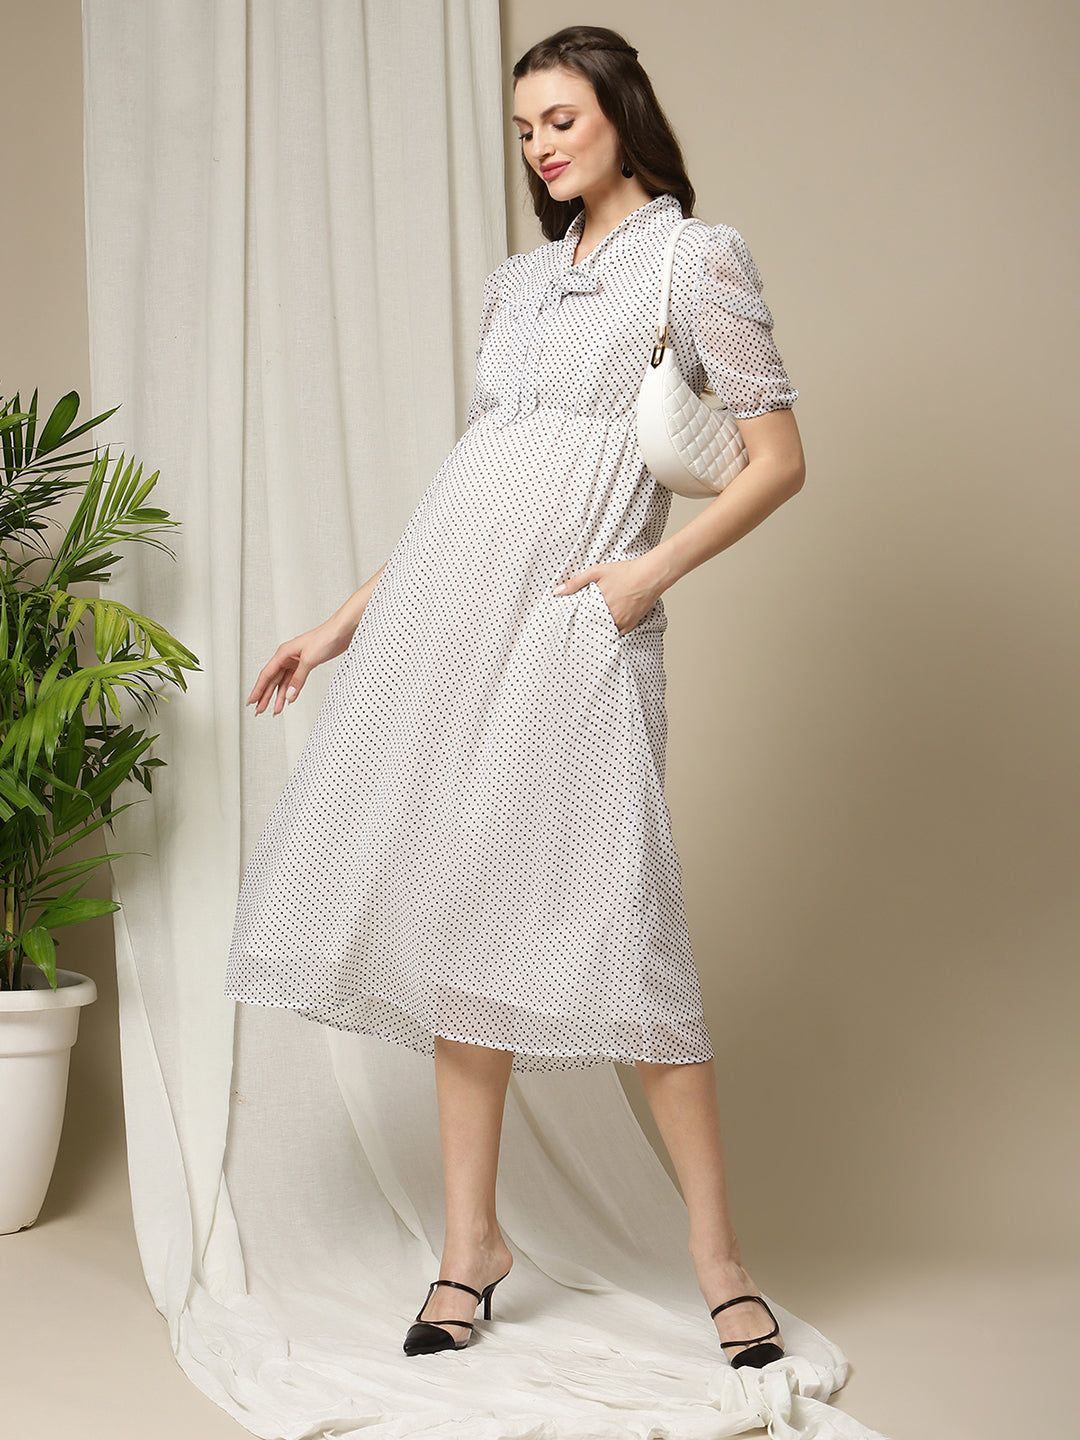 Foern White Maternity Photoshoot Dress Pregnancy Gowns Robe Clothes Dresses  Maternity Nursing Dresses Casual Gown for PhotoshootWhiteMBust338in   Amazoncouk Fashion